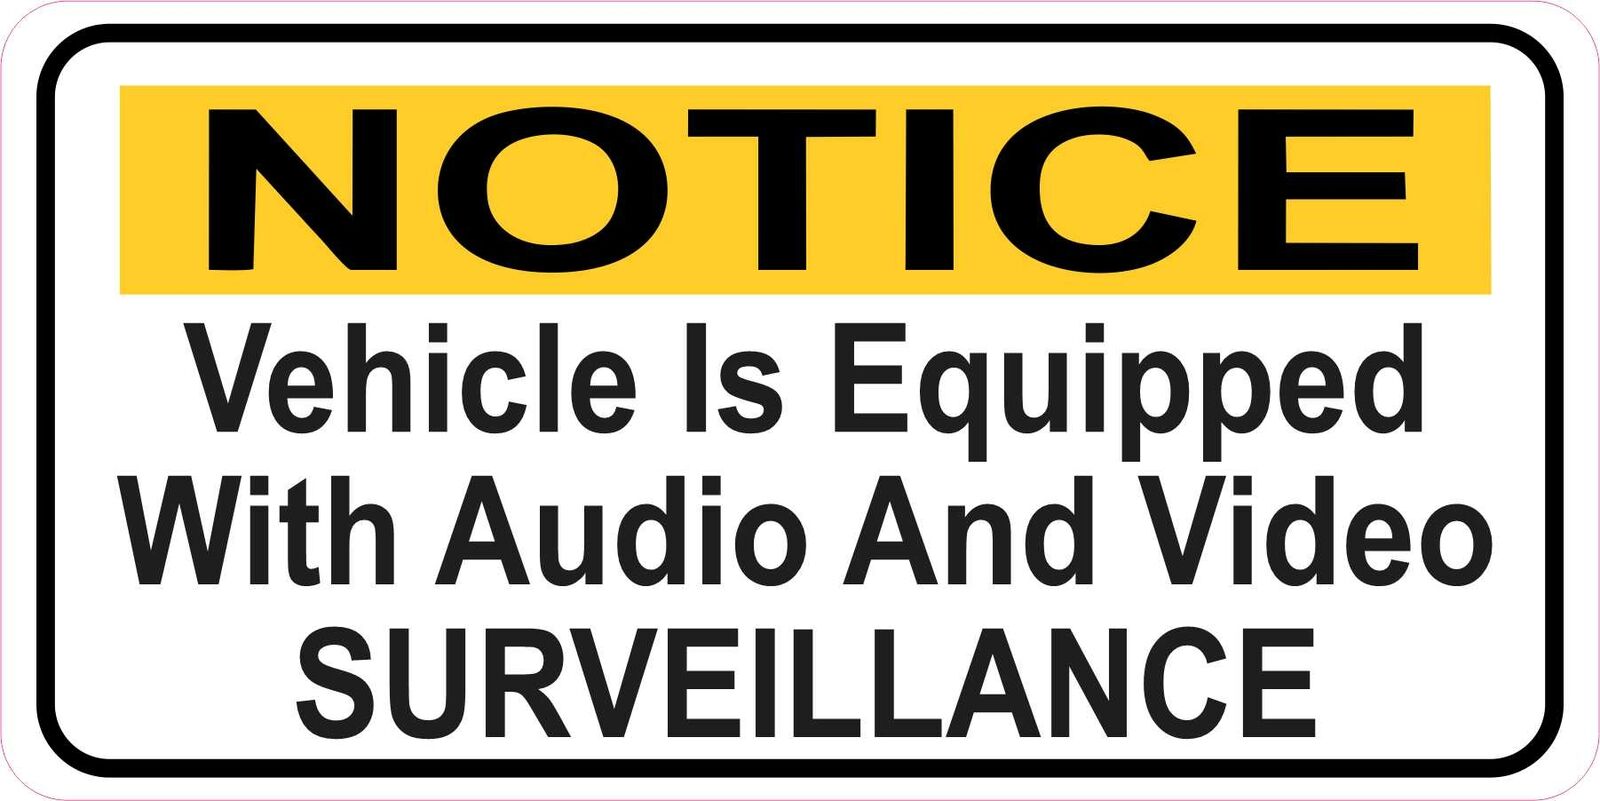 6in x 3in Vehicle Audio and Video Surveillance Sticker Car Truck Bumper Decal